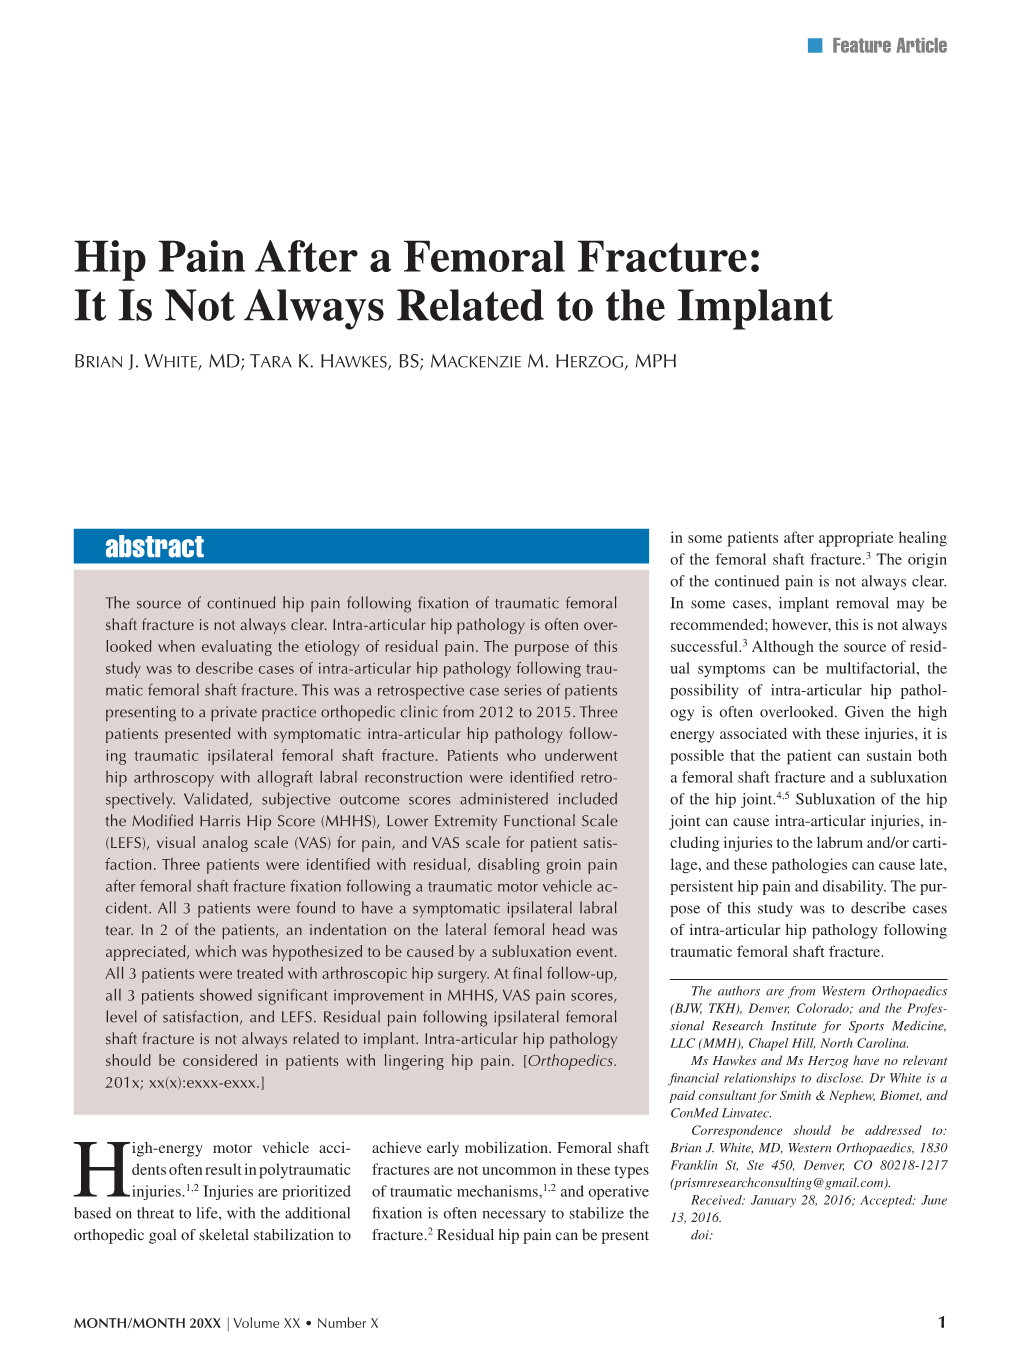 Hip Pain After a Femoral Fracture: It Is Not Always Related to the Implant